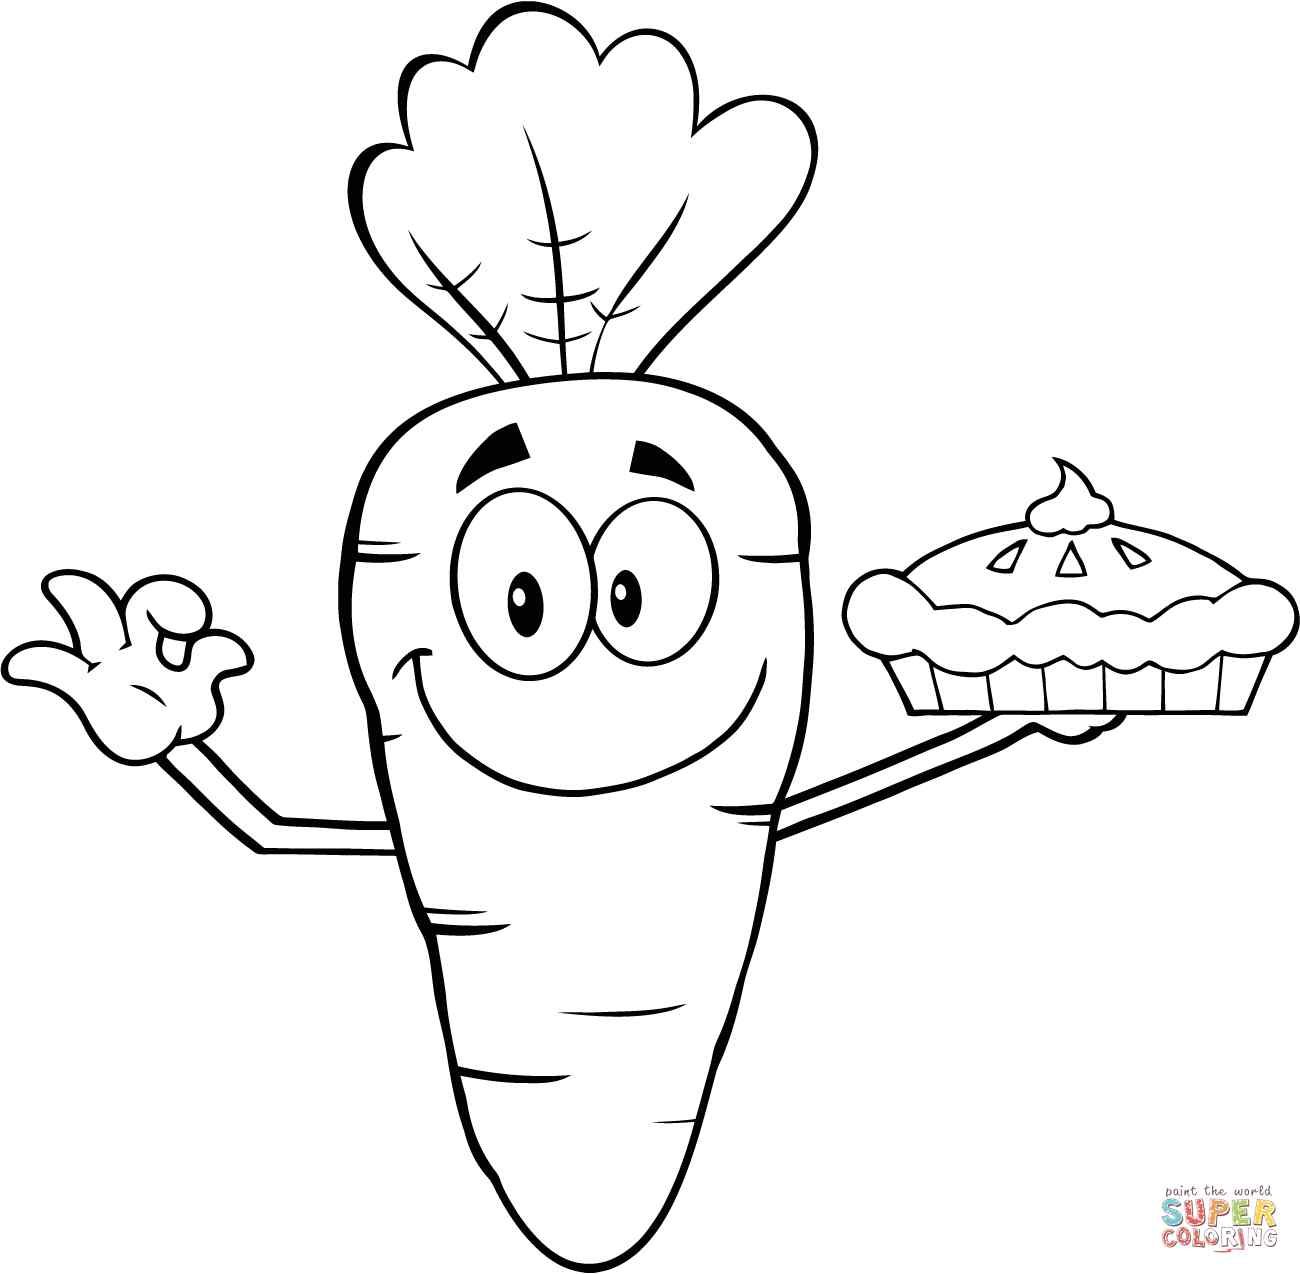 Smiling Cartoon Carrot Holding Up A Pie